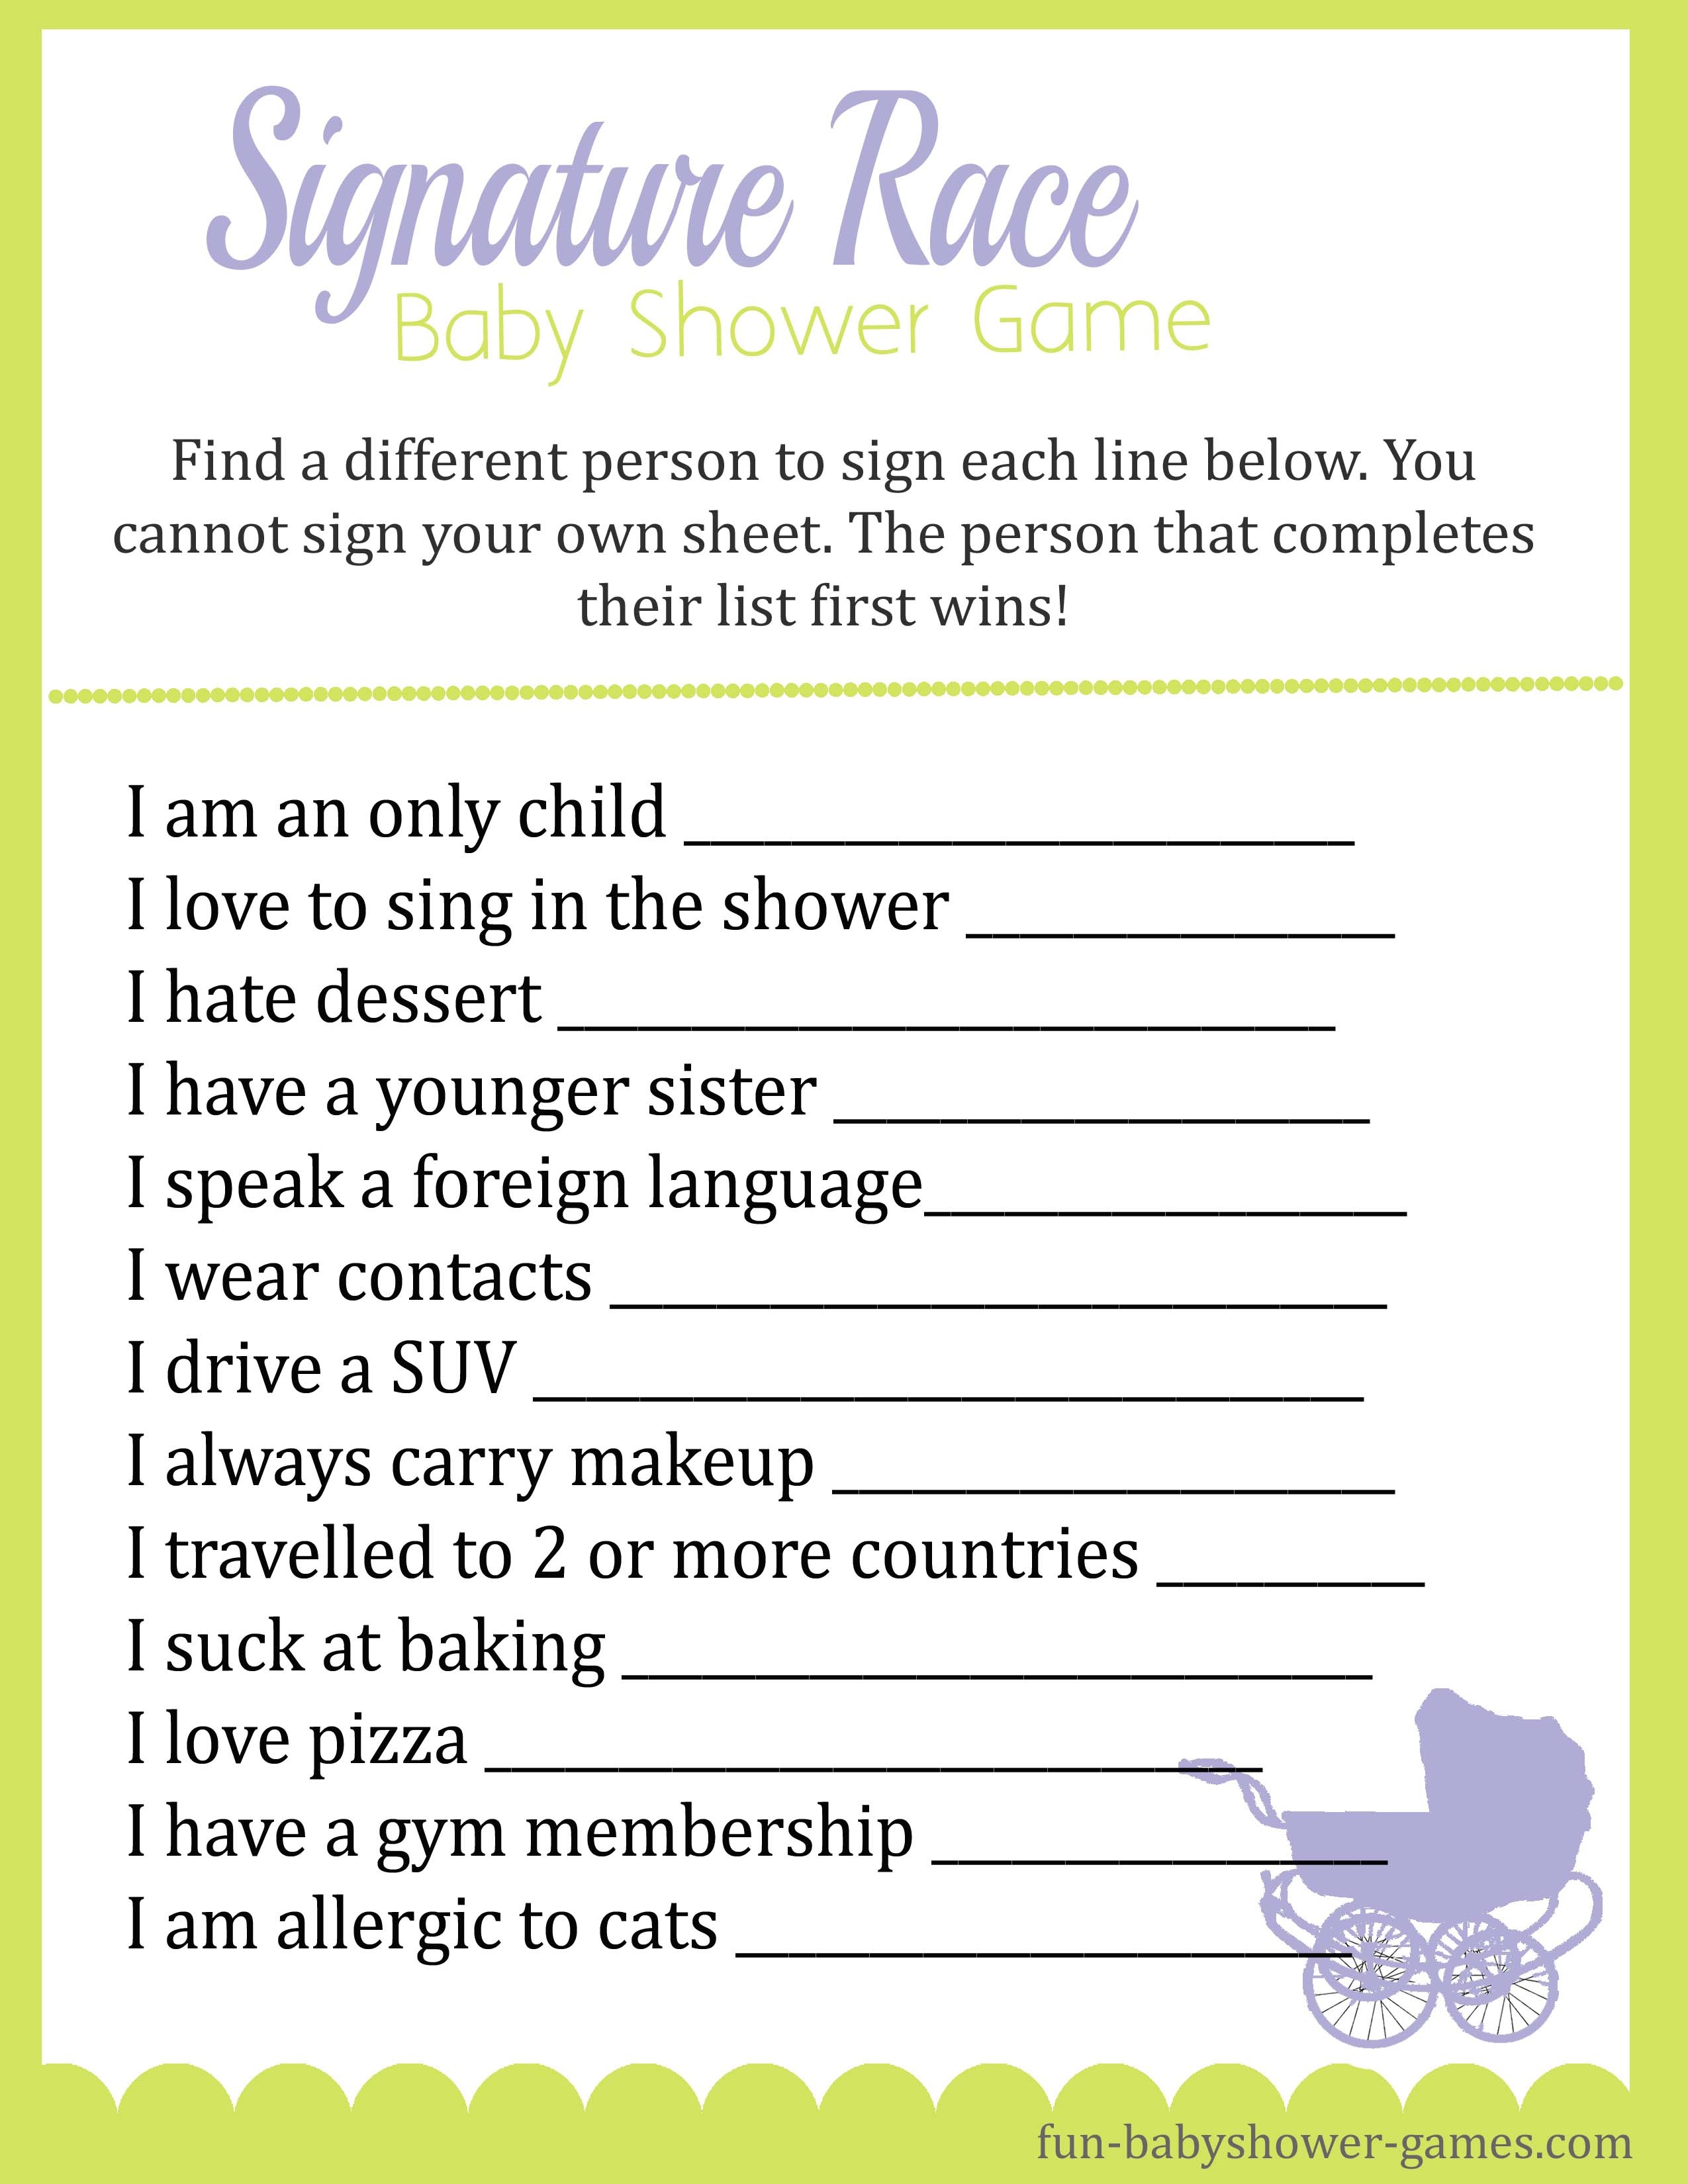 Baby Shower Signature Race Game - Unique Baby Shower Games Free Printable